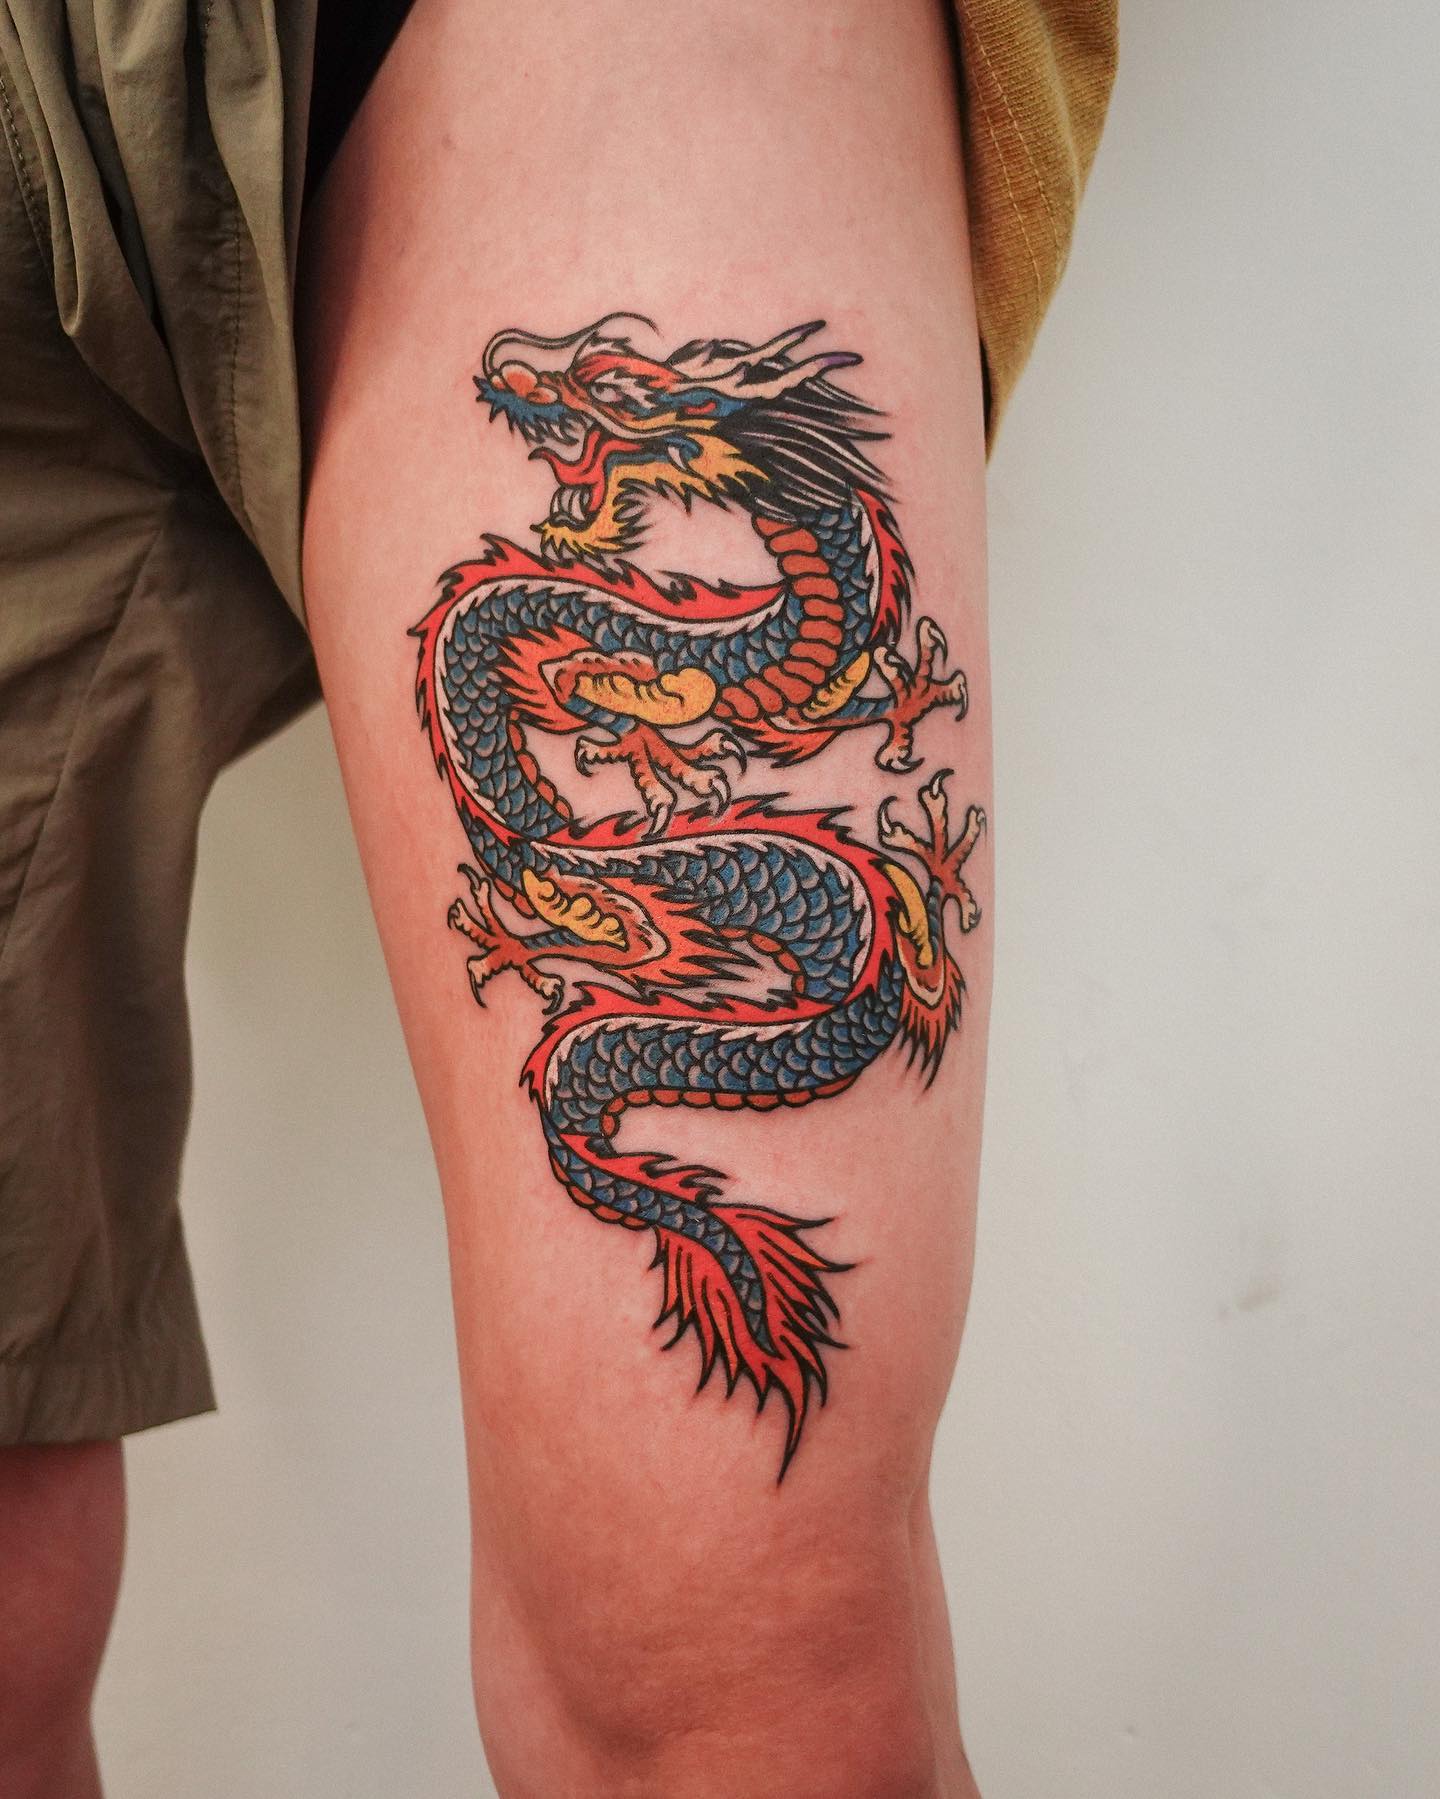 Colorful Dragon Tattoo on Thigh